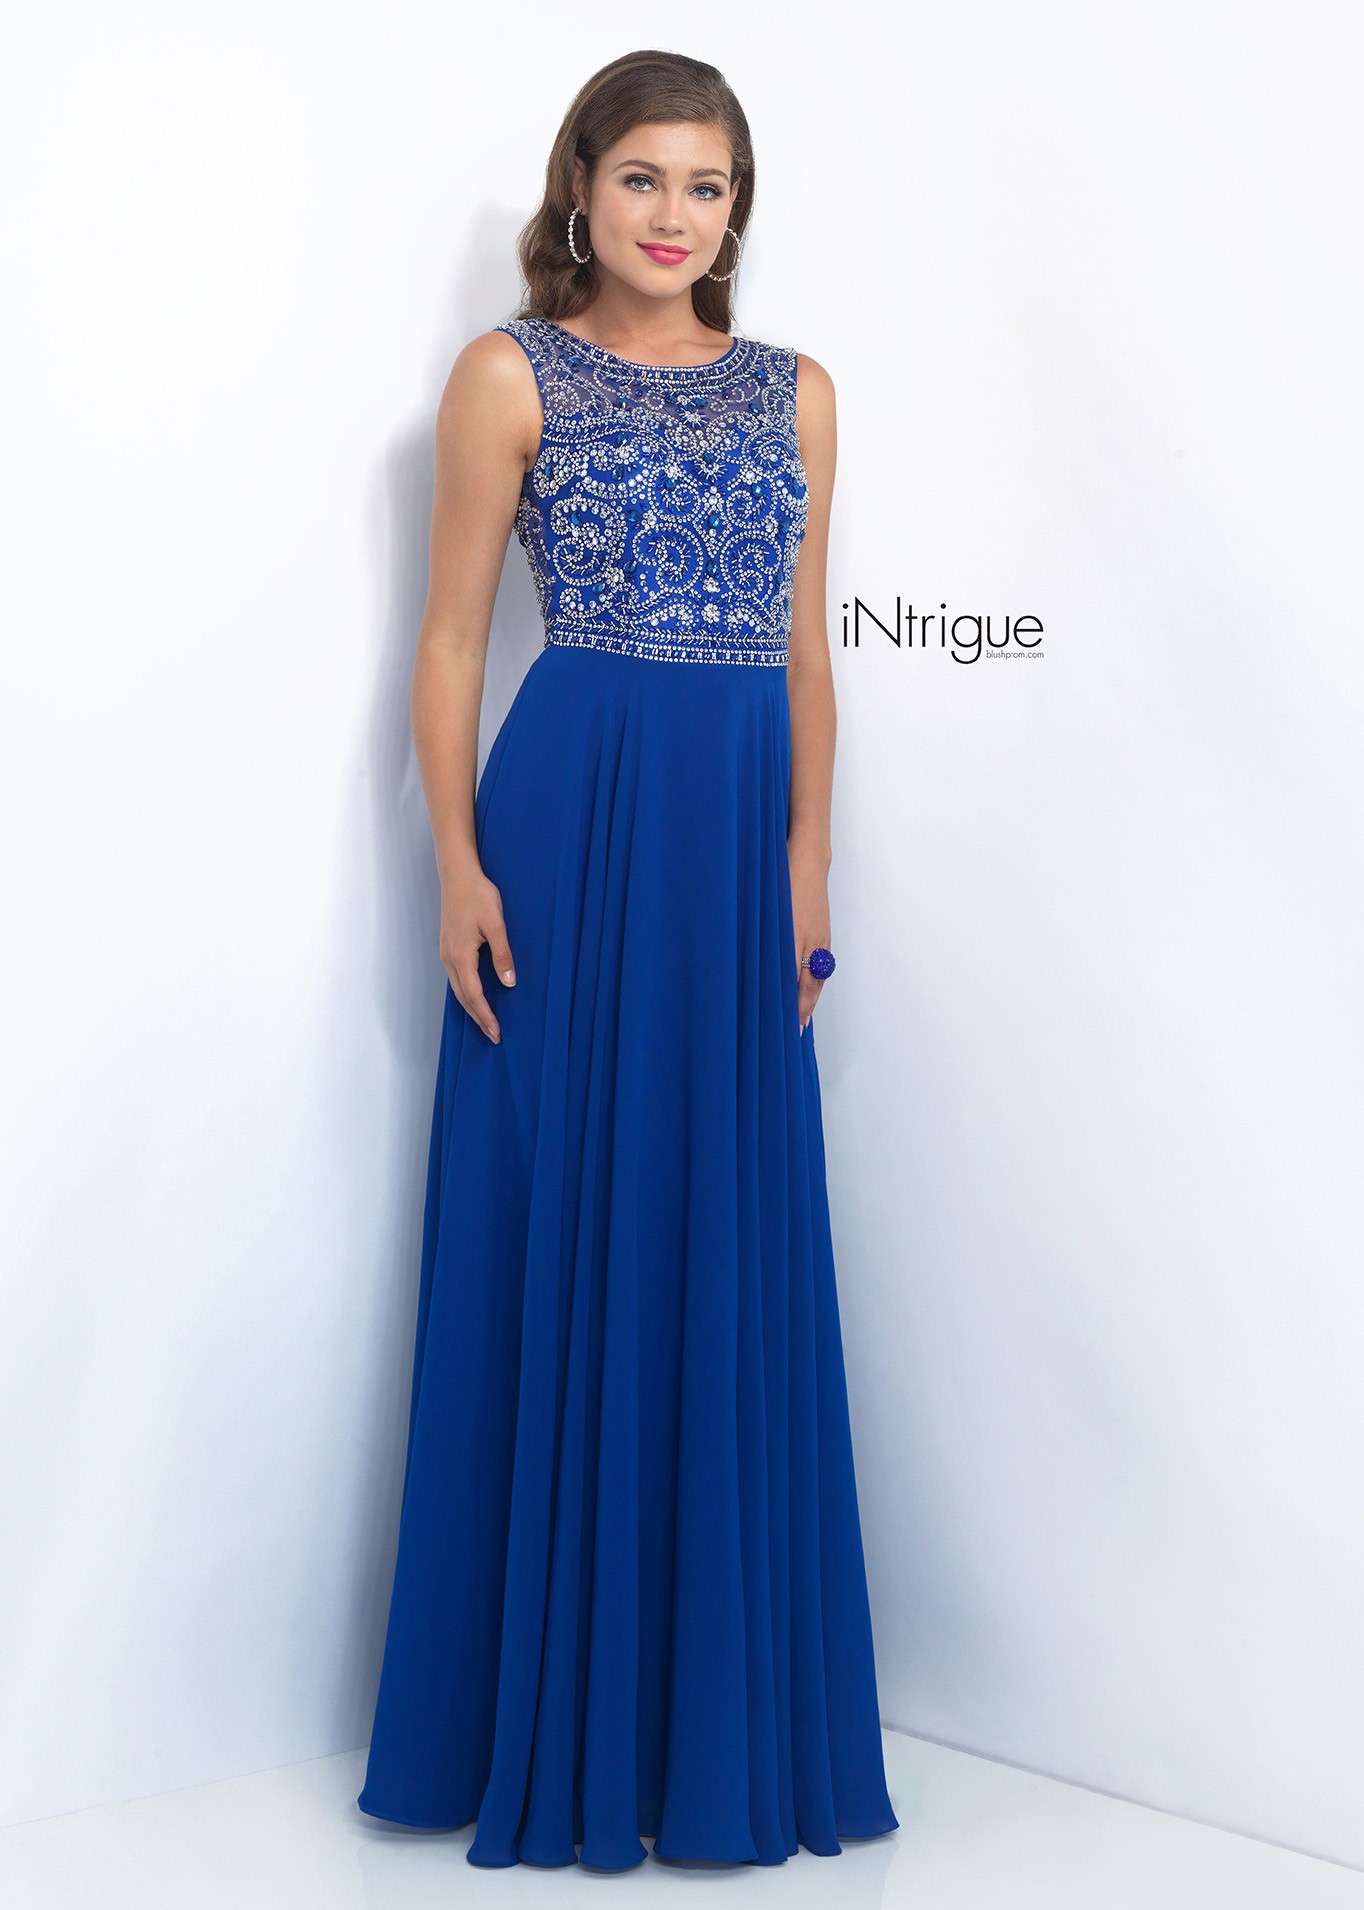 Intrigue 152 Unique Fully Beaded Bodice Prom Dress